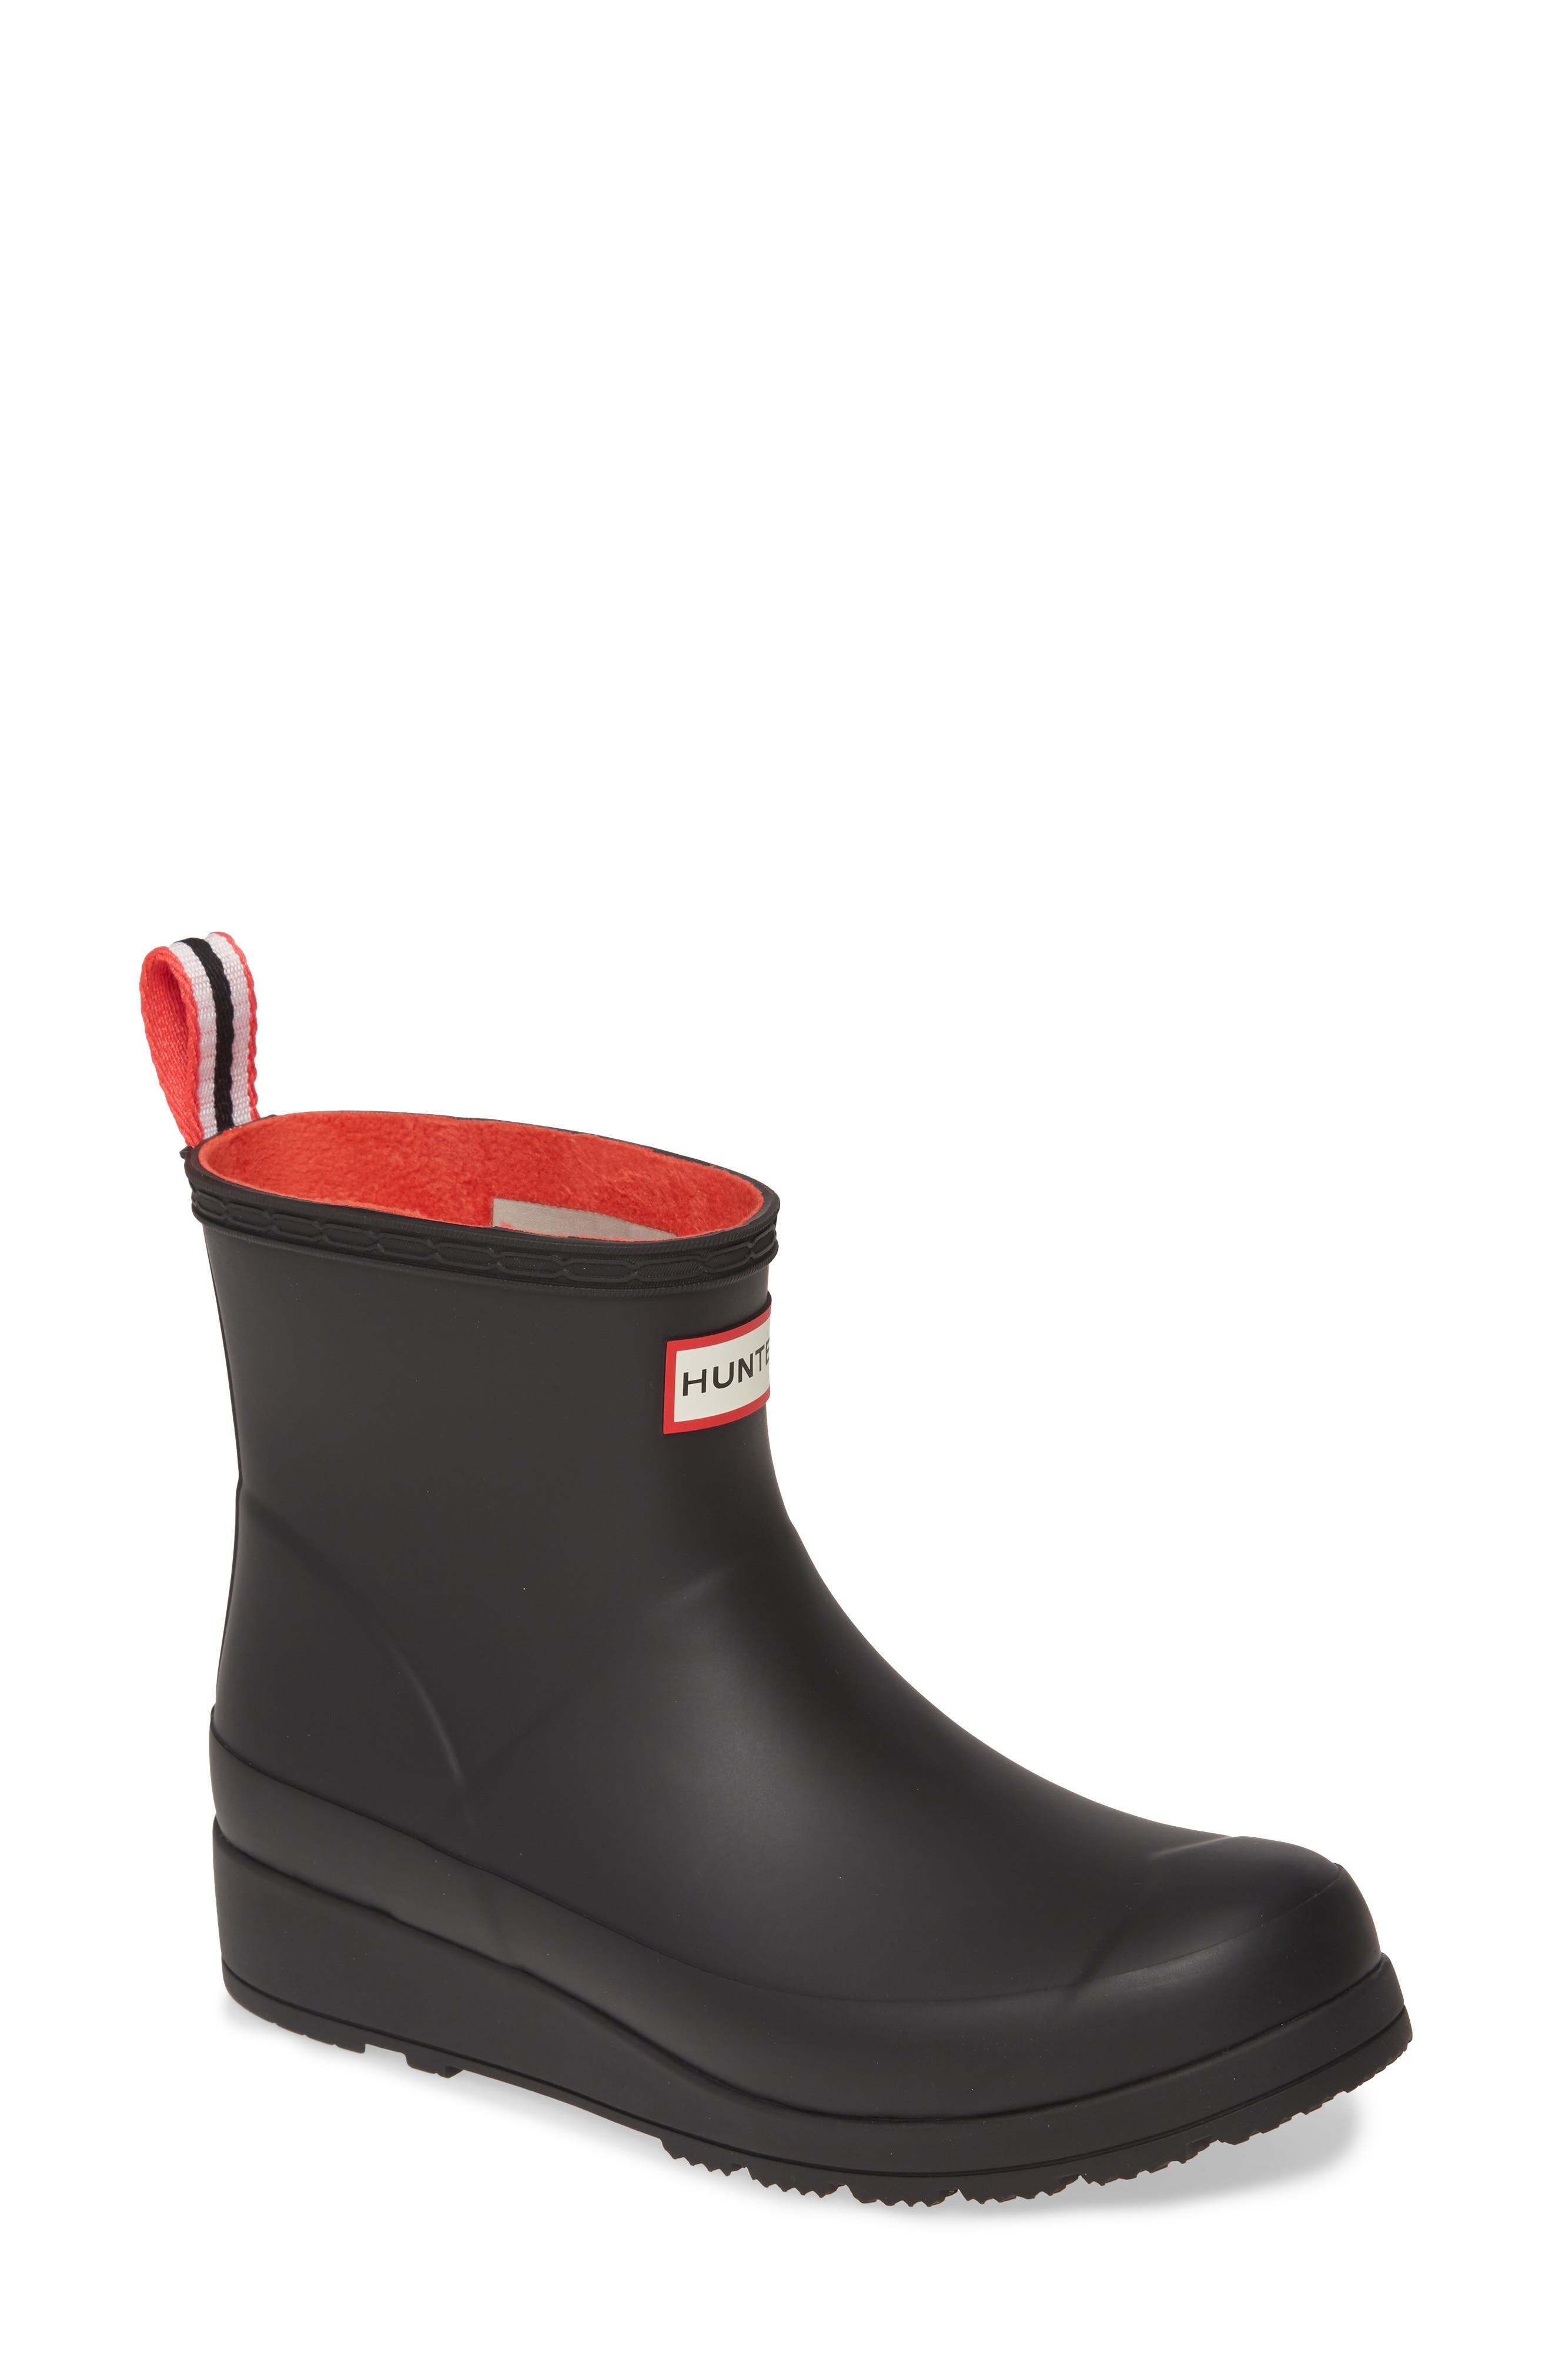 hunter insulated short boots